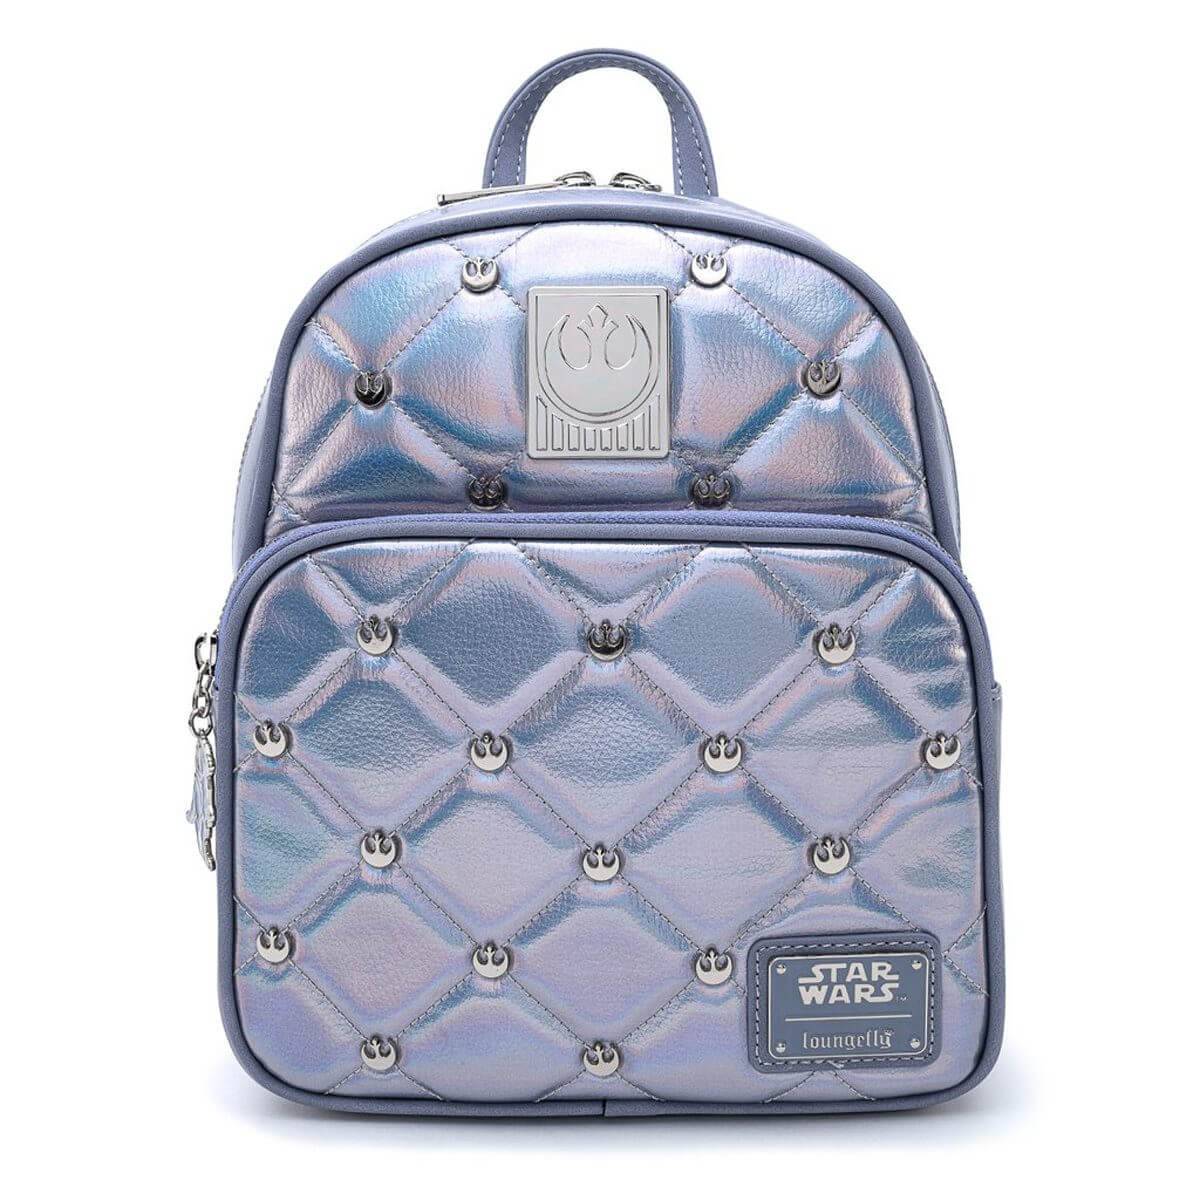 Loungefly Star Wars Hoth Empire Irredescent Mini Backpack SALE